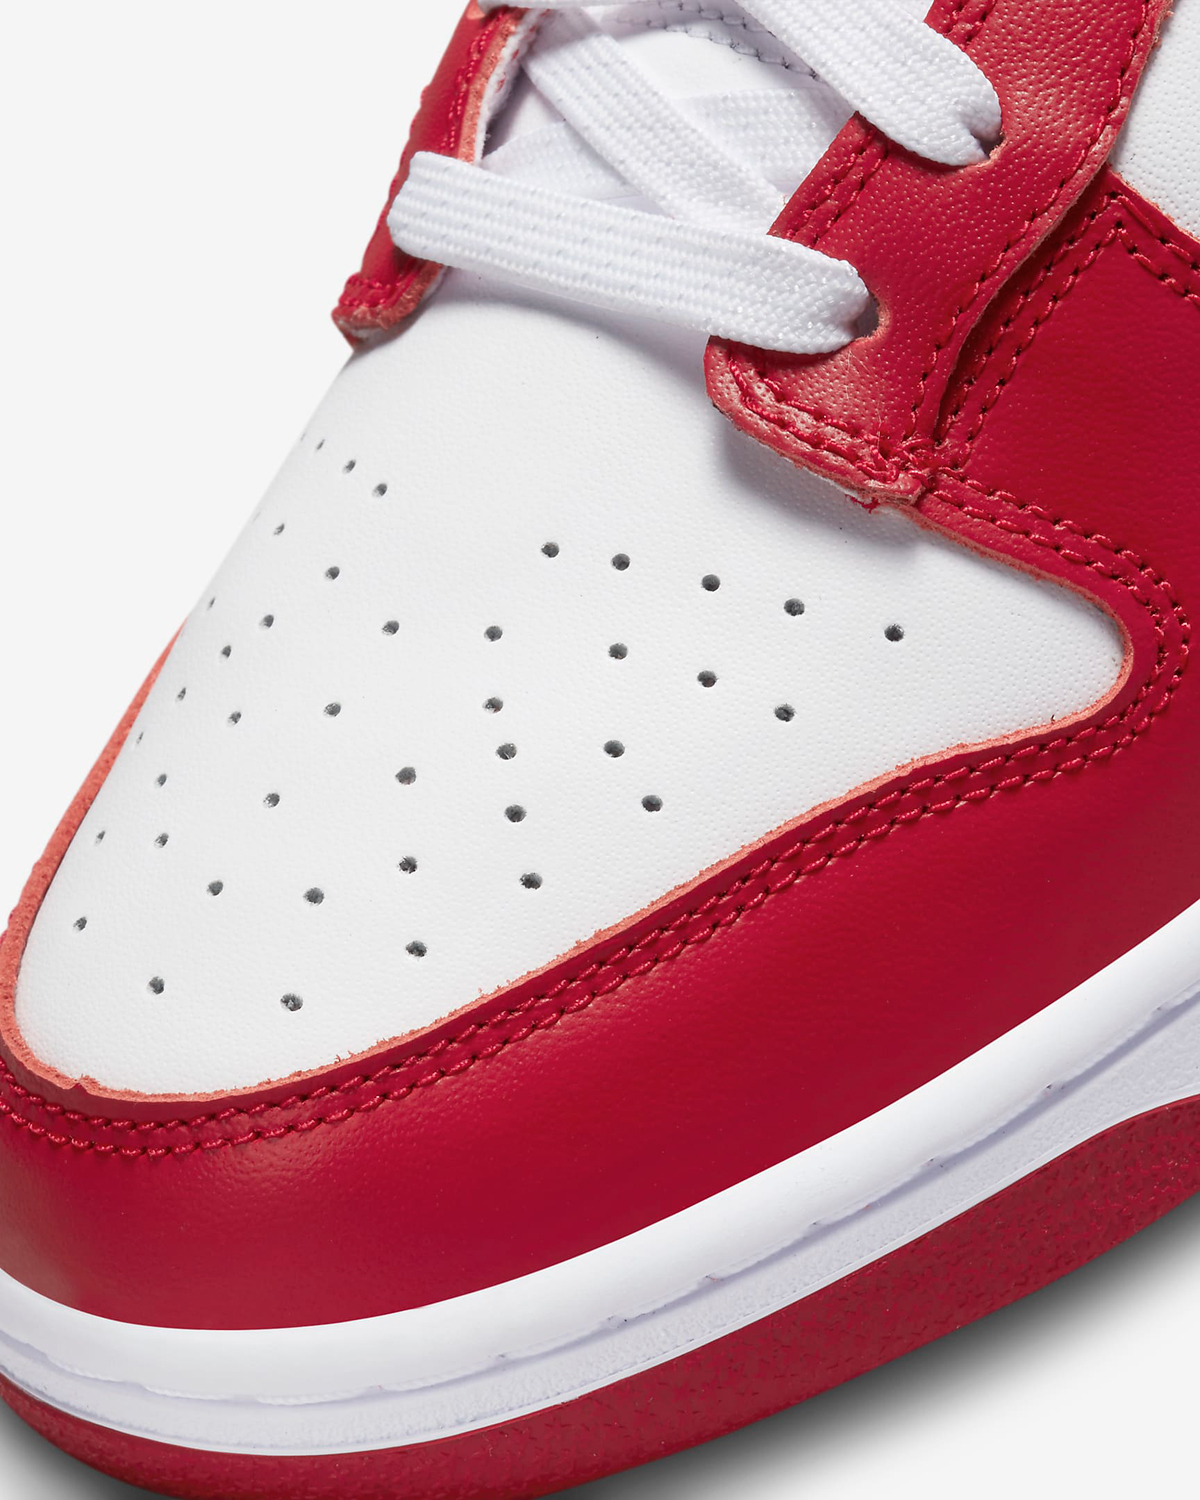 Nike-Dunk-Low-Gym-Red-Release-Date-7